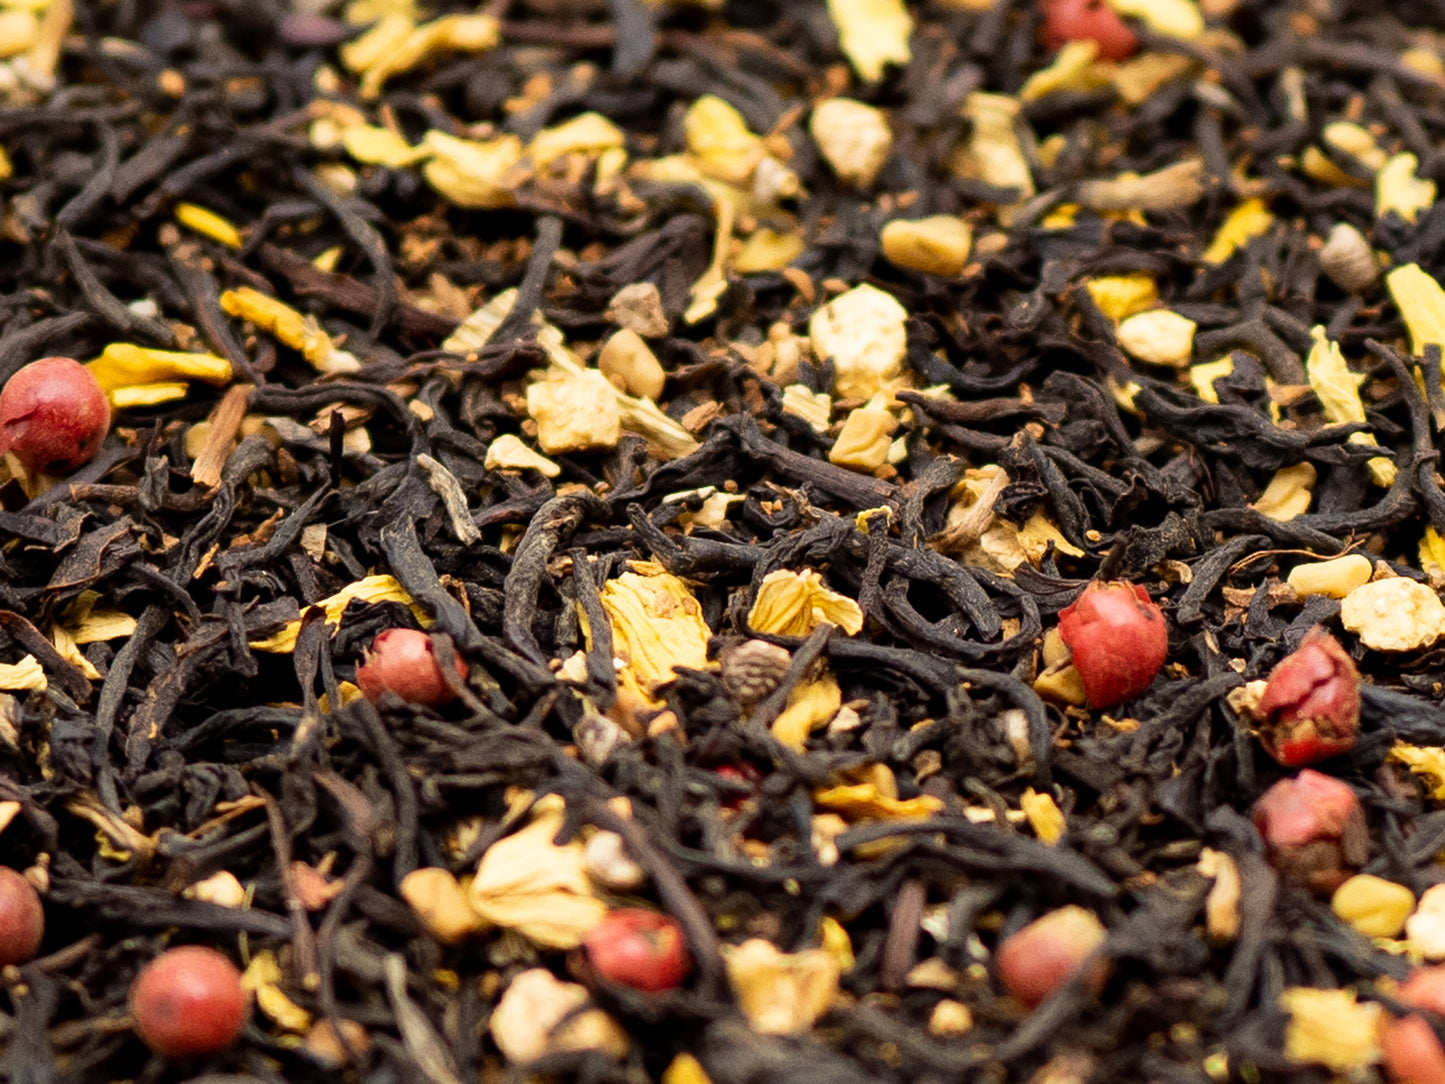 A close up of loose Aromatic Chai spiced black tea from TEA23